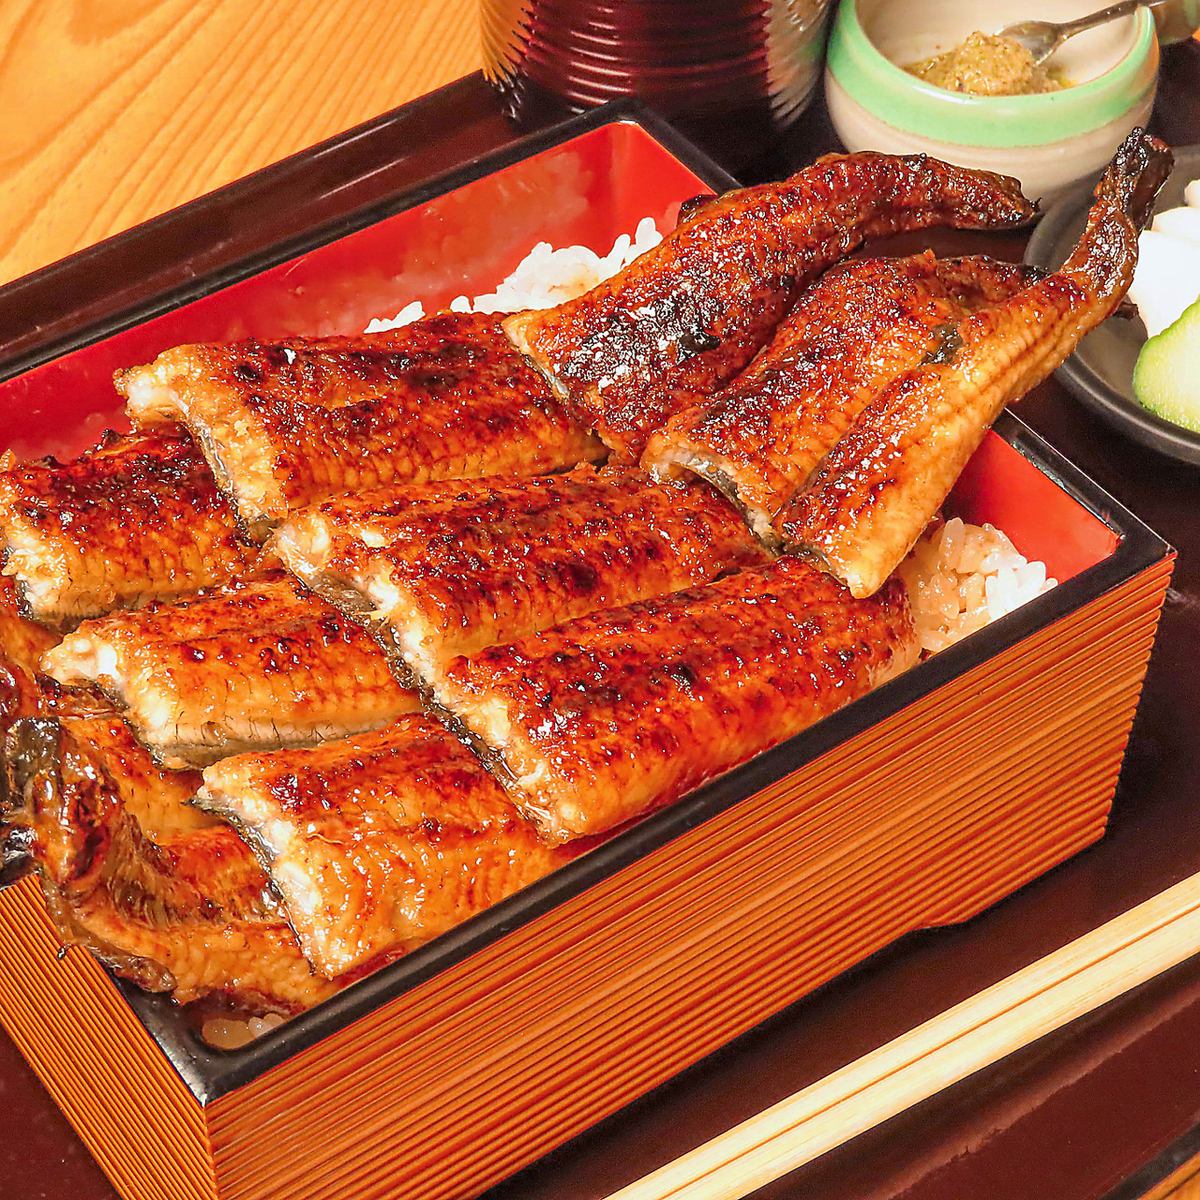 Experience a new charm with Kansai-style grilled eel and a side dish of eel that you don't often see.